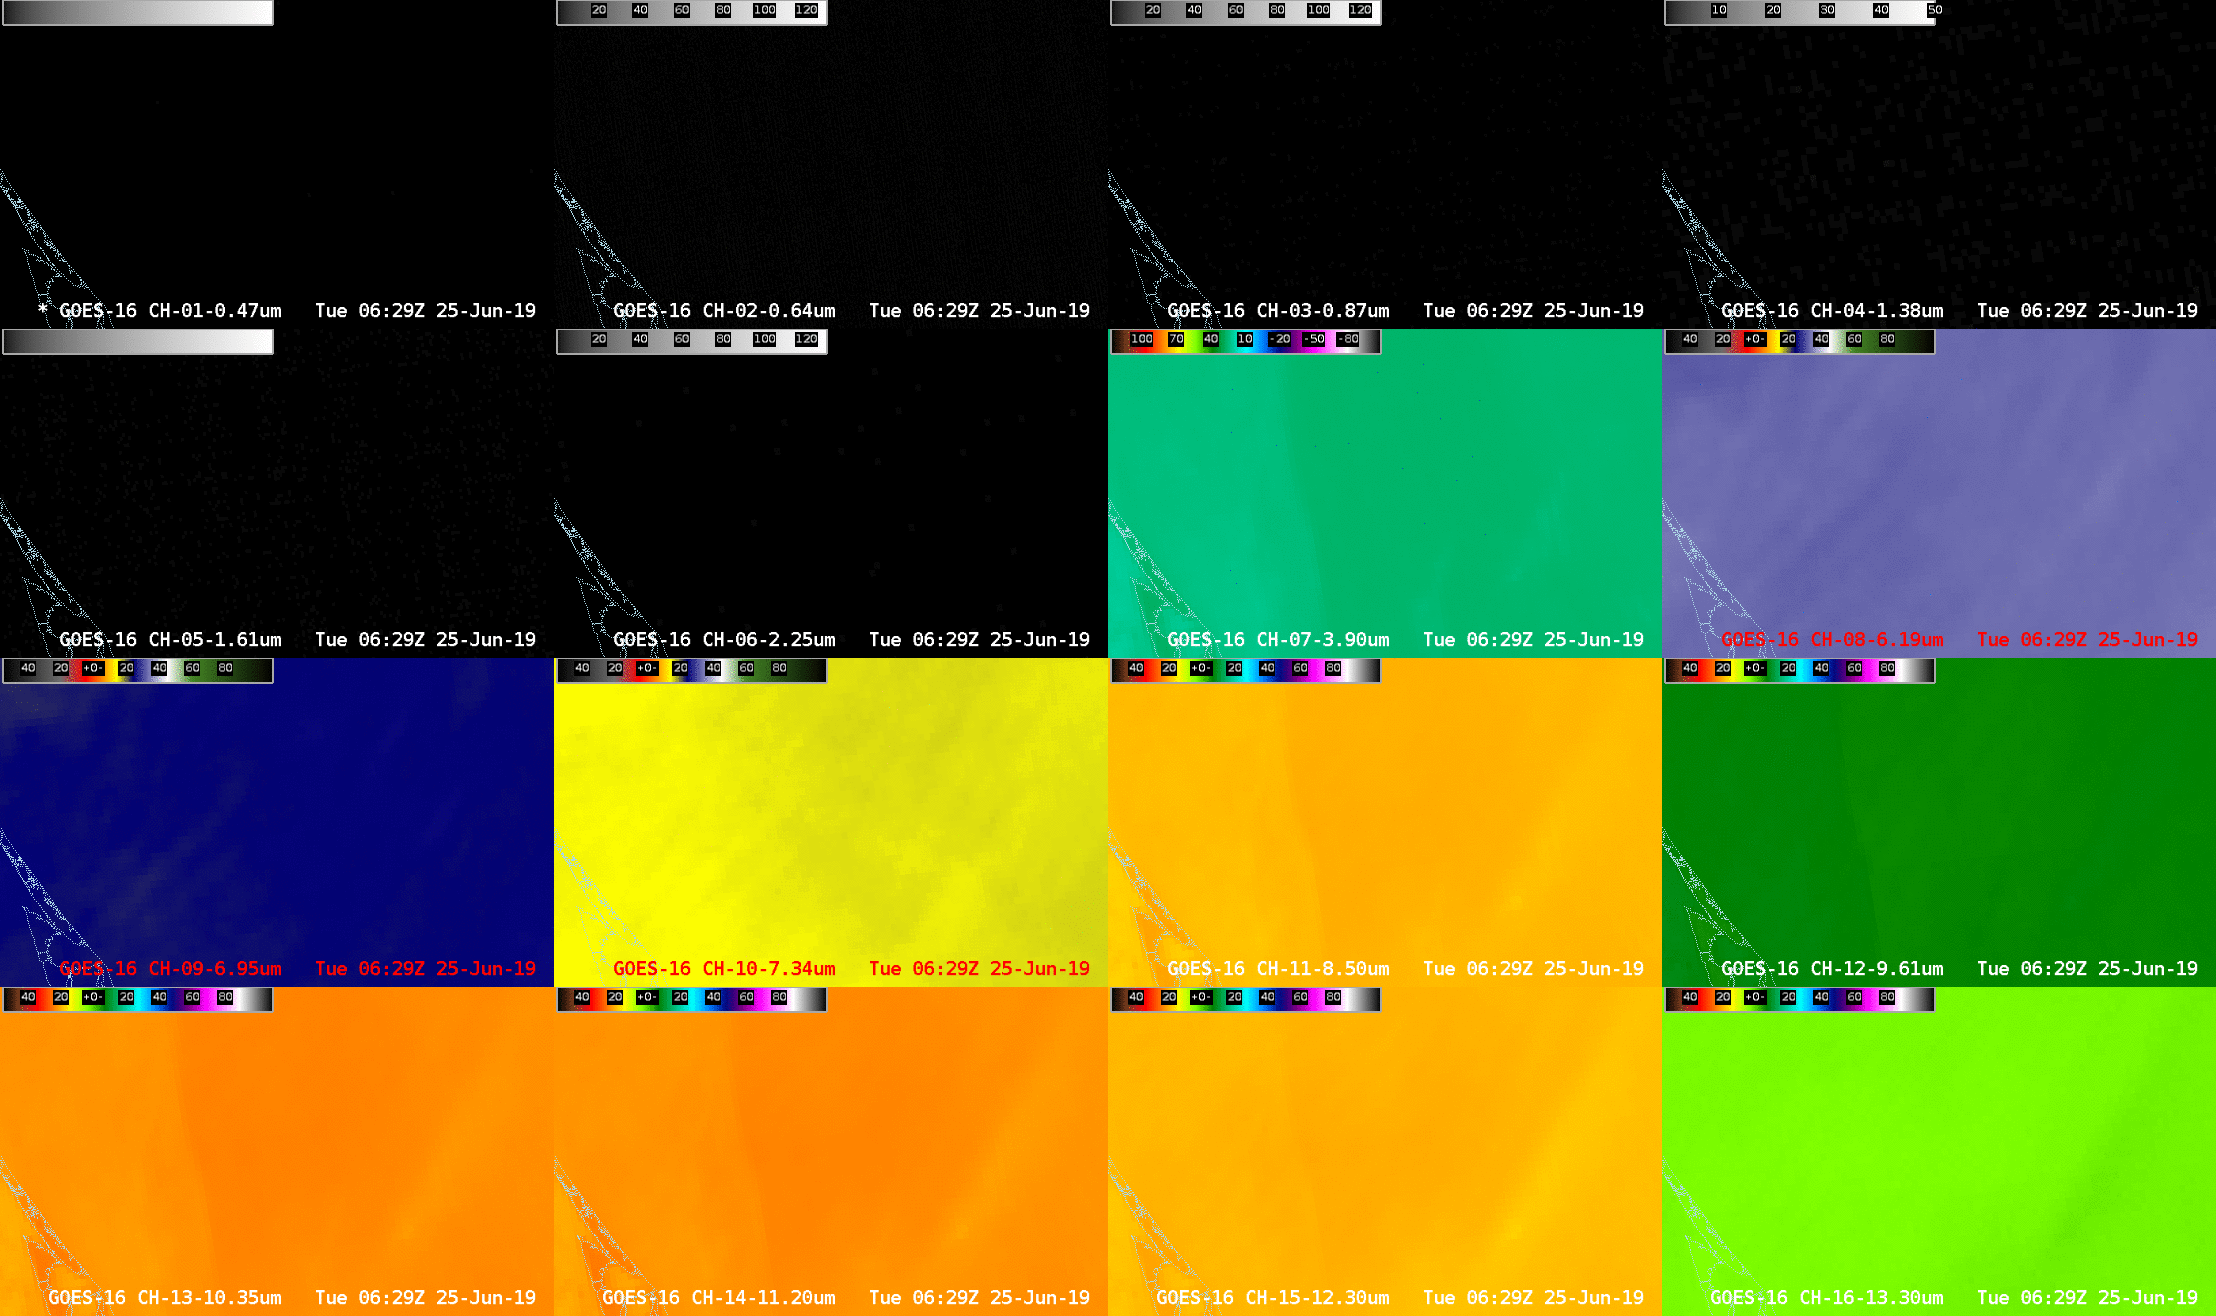 16-panel images of all GOES-16 ABI spectral bands [click to enlarge]